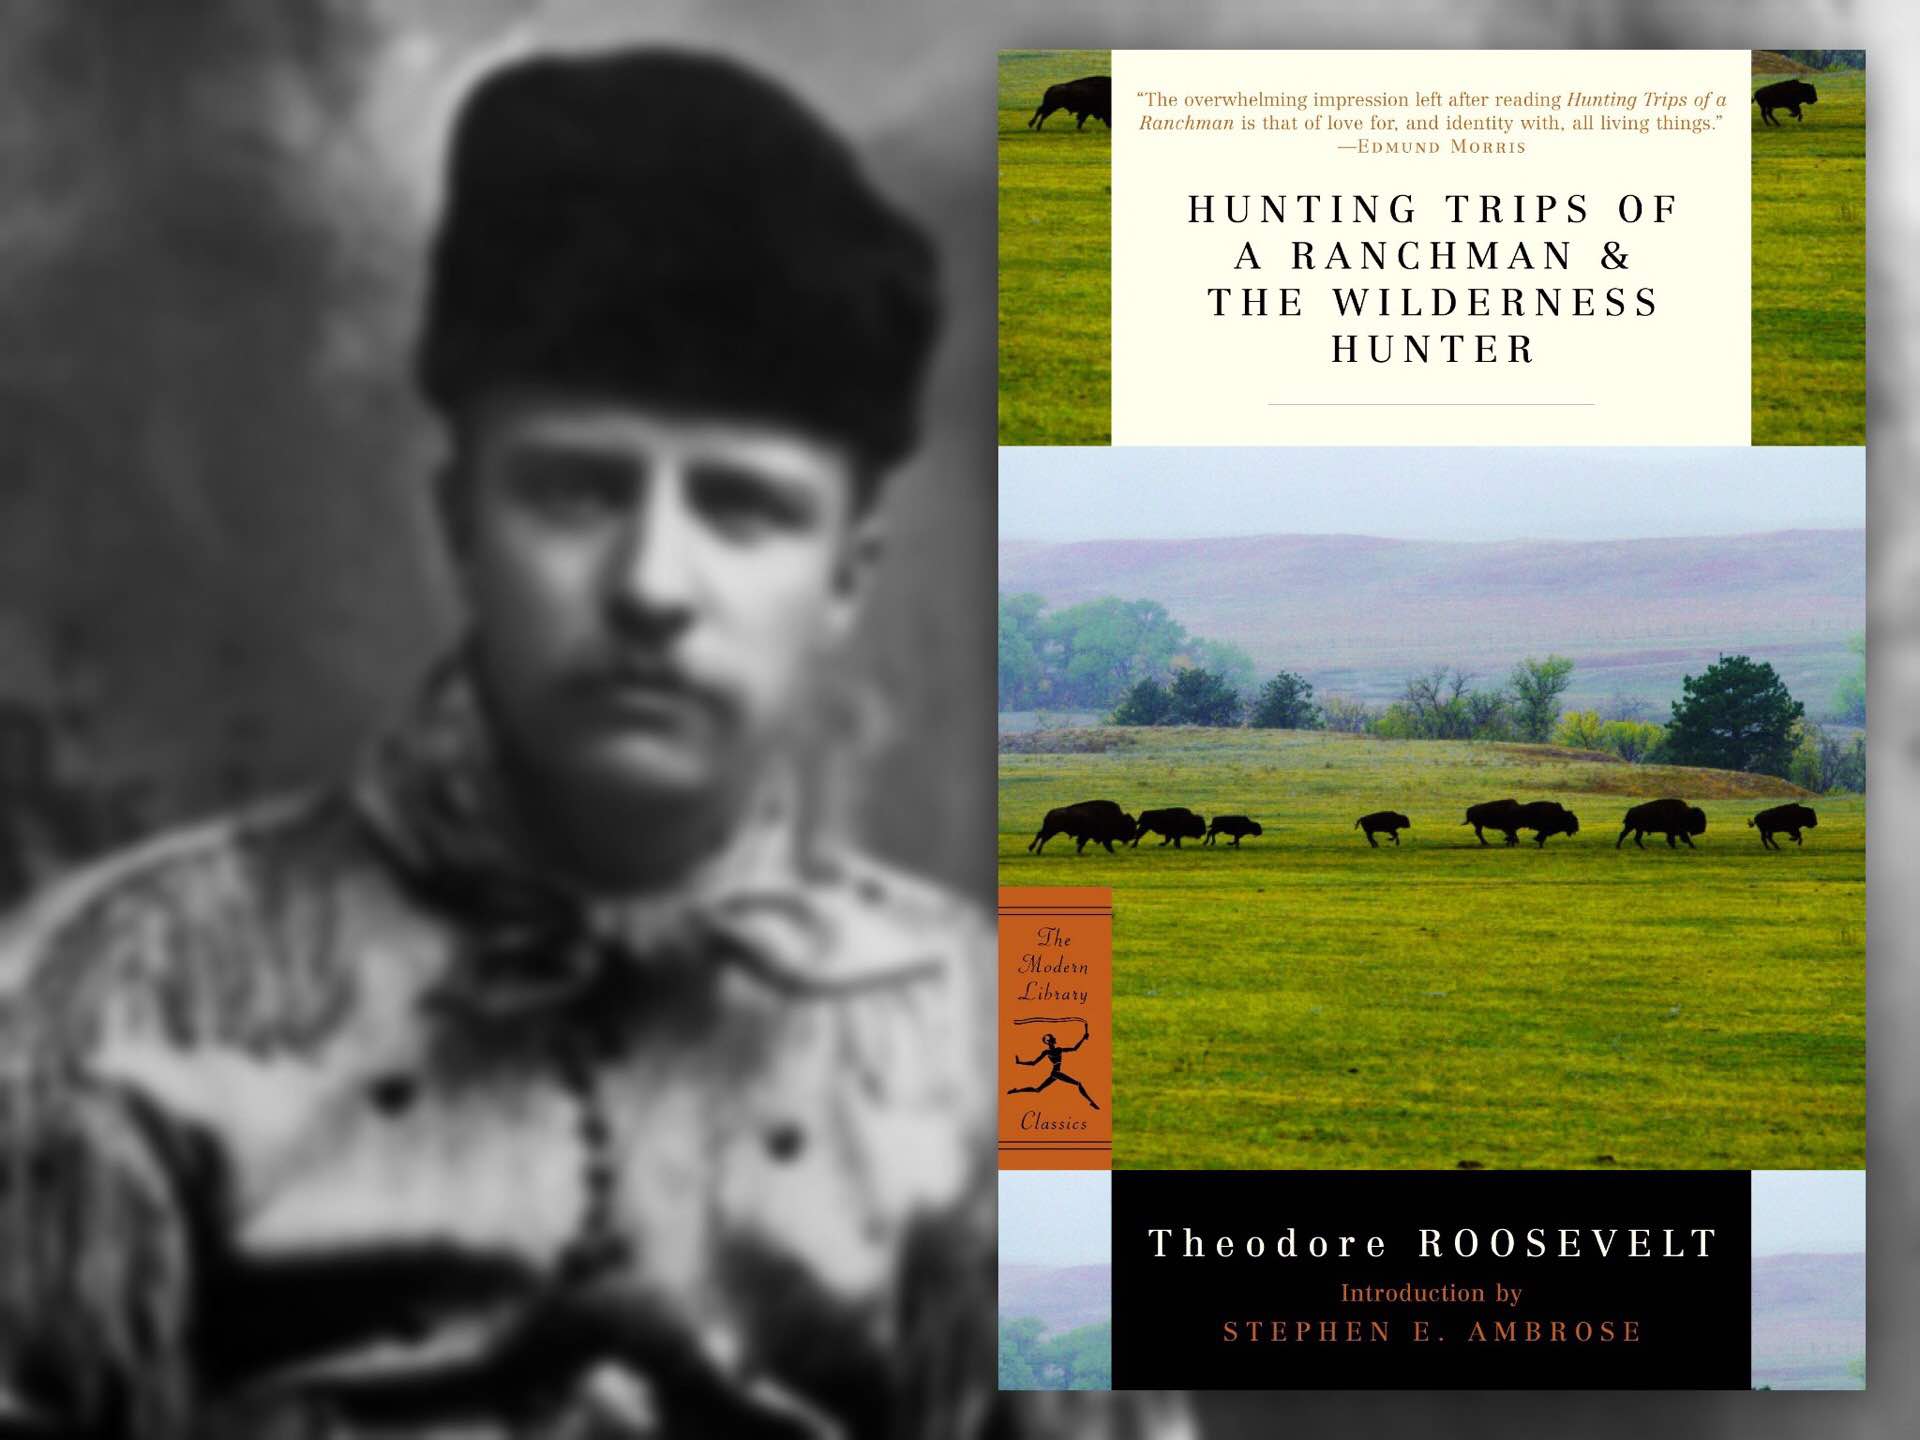 hunting-trips-of-a-ranchman-and-the-wilderness-hunter-by-theodore-roosevelt